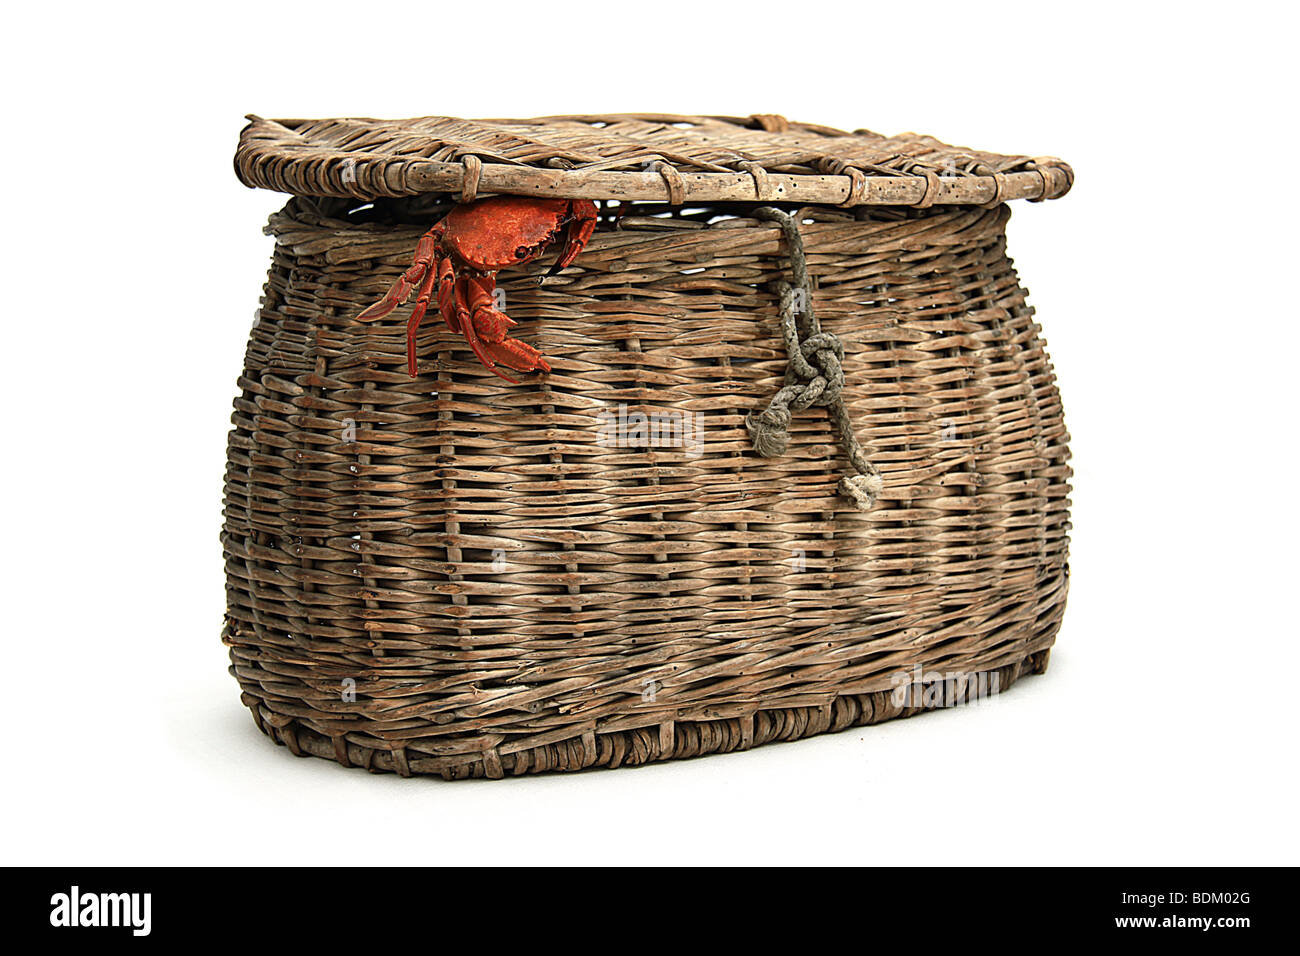 little crab trying to escape from basket Stock Photo